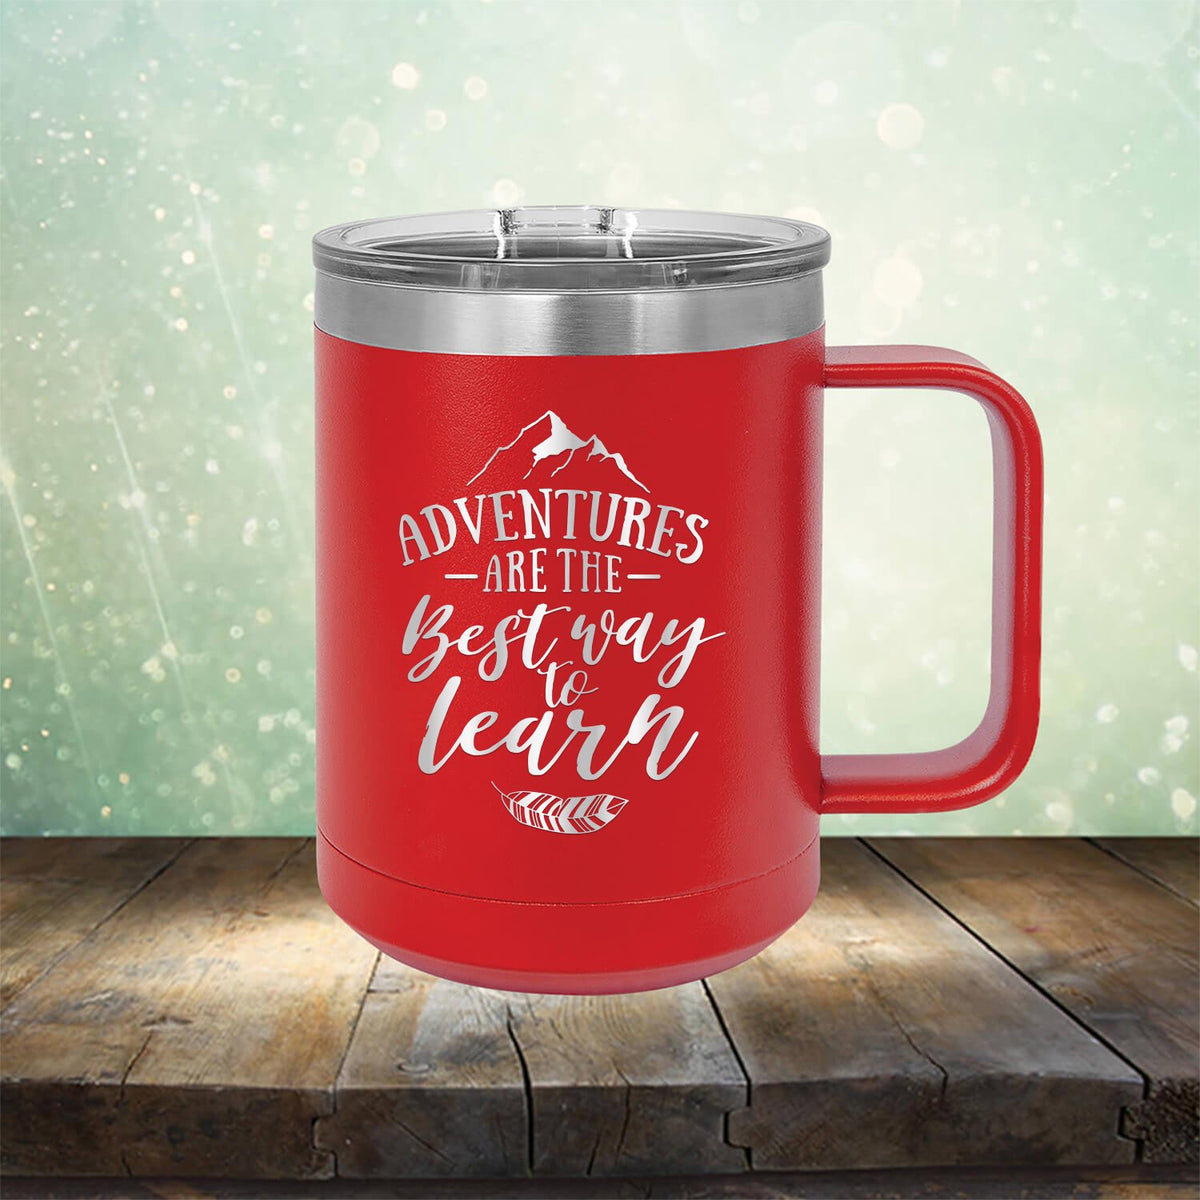 Adventures Are The Best Way to Learn - Laser Etched Tumbler Mug